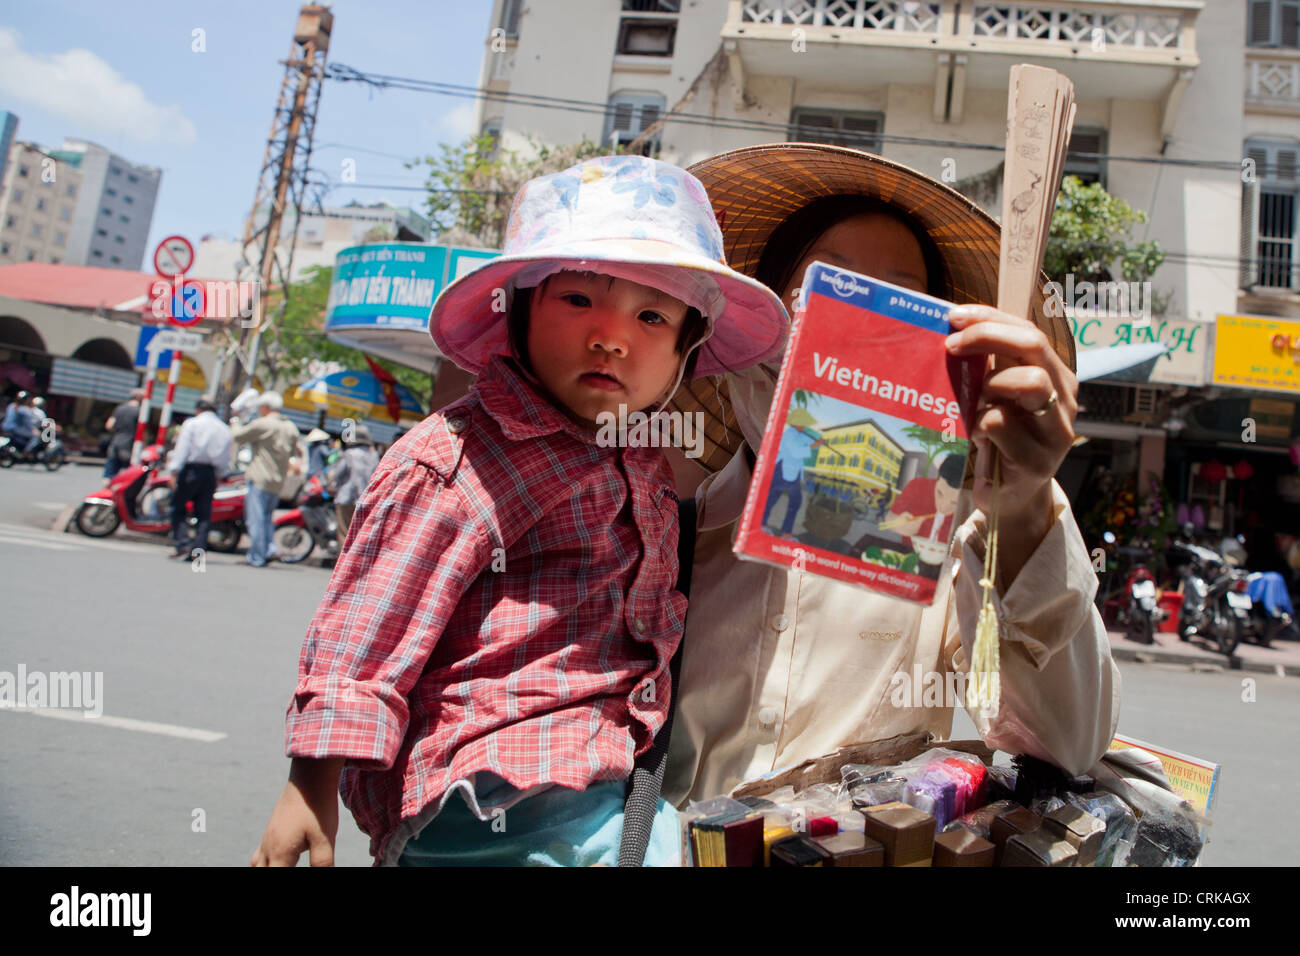 A lady with her daughter selling souvenirs for tourists near Ben Thanh in Dist. 1, HCMC, Vietnam Stock Photo